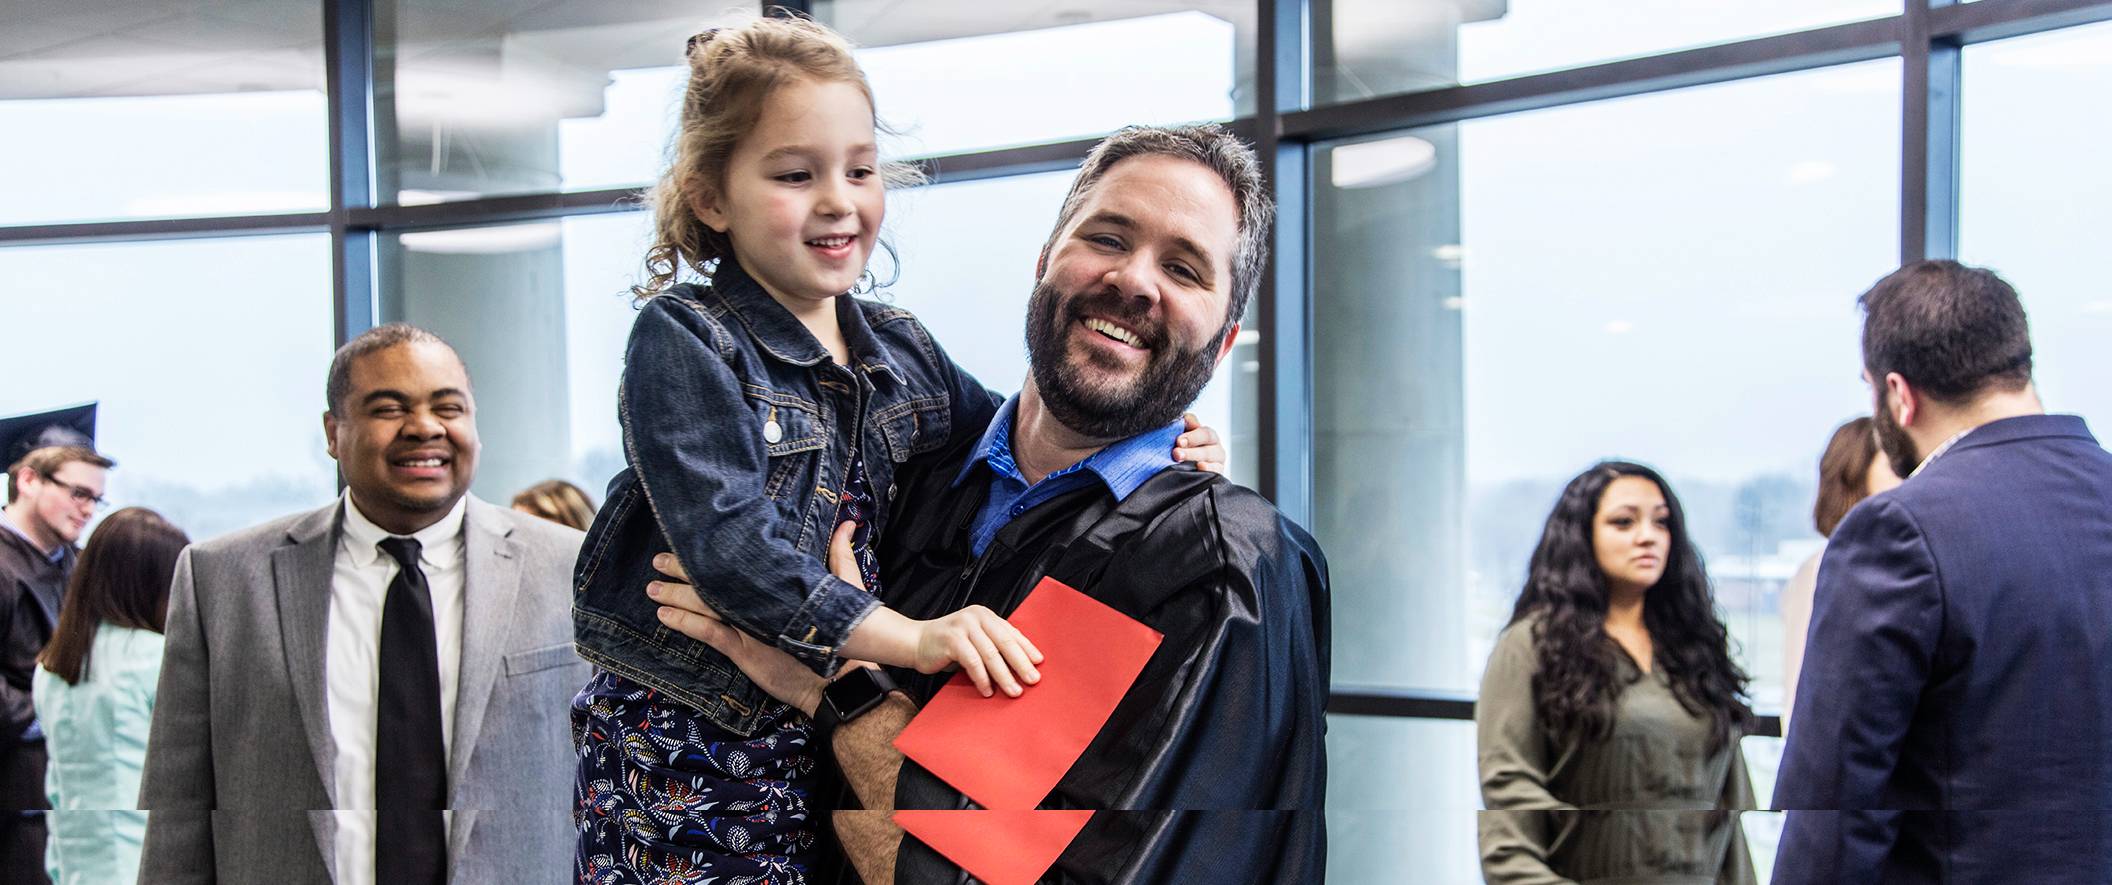 Graduate dad holds young daughter on graduation day